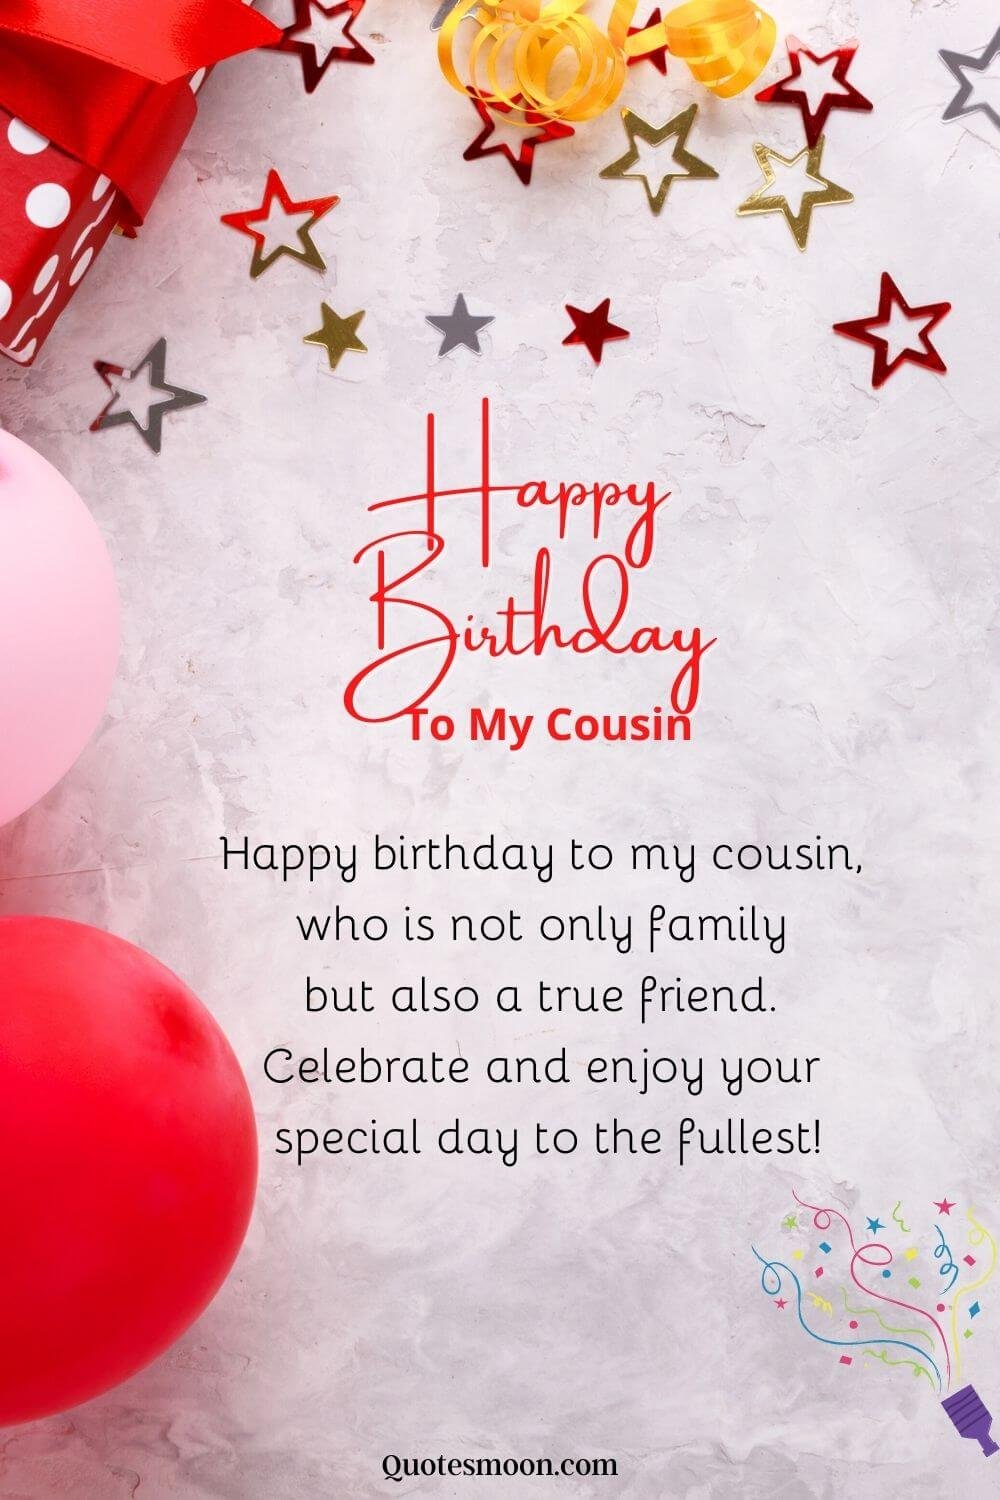 for my cousin best day best images wishes